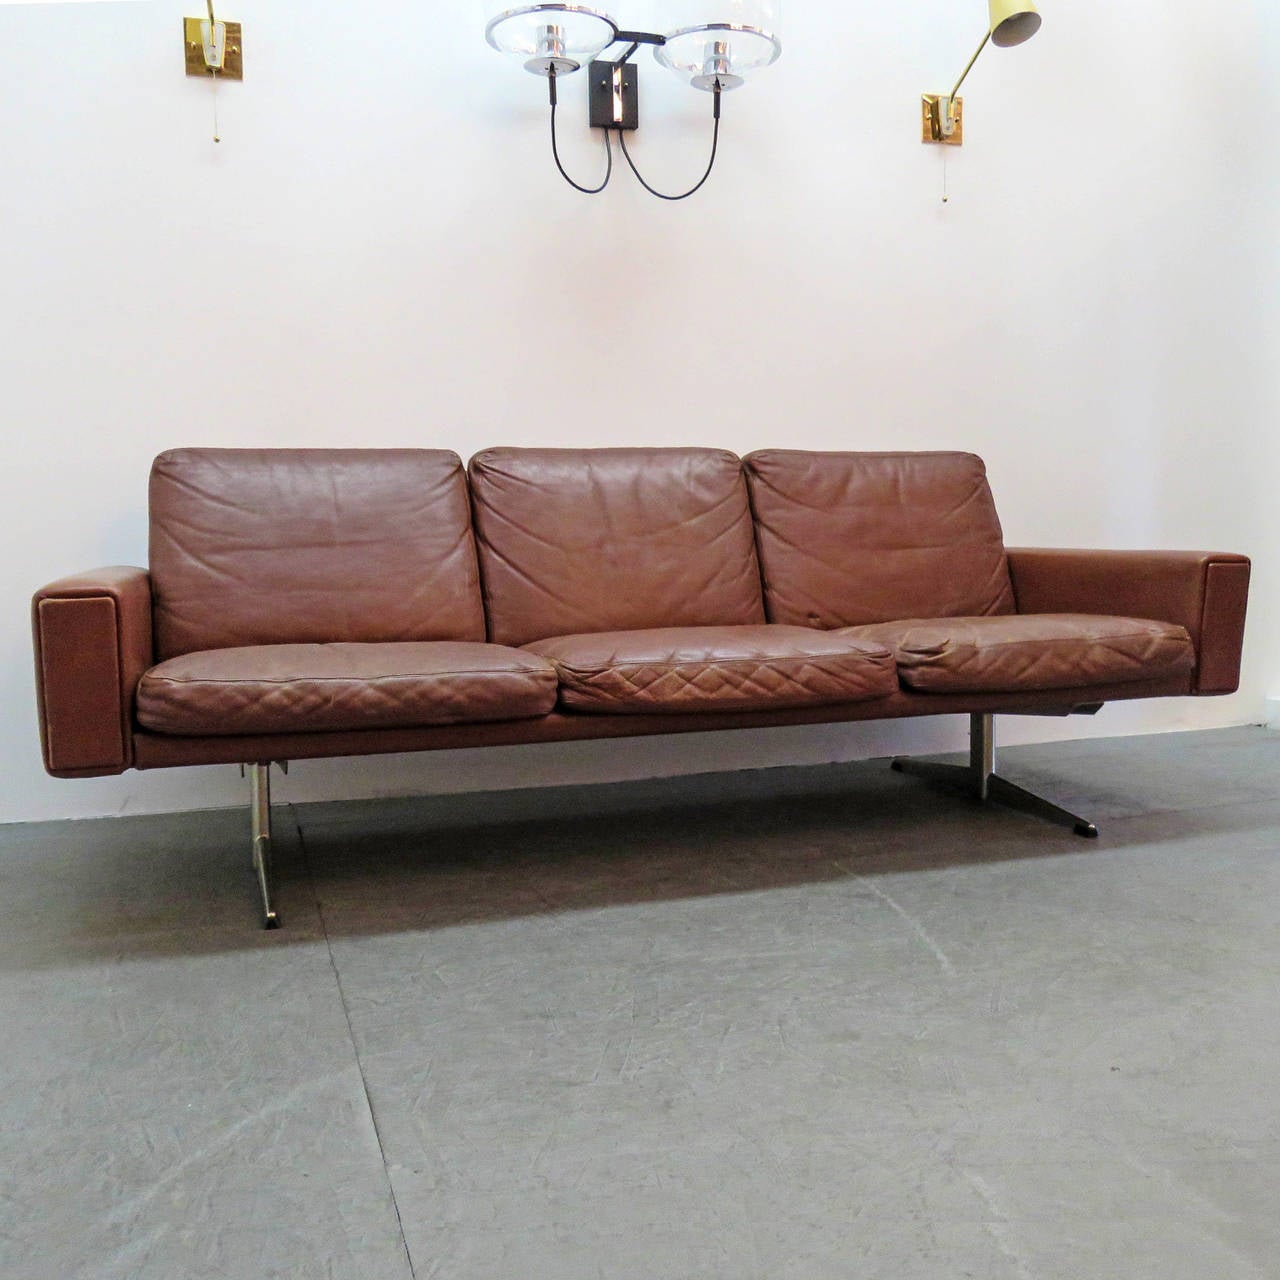 Wonderful 1960 Danish brown leather sofa, with chrome-plated metal legs, great shape, low profile, wonderful patina to the leather.